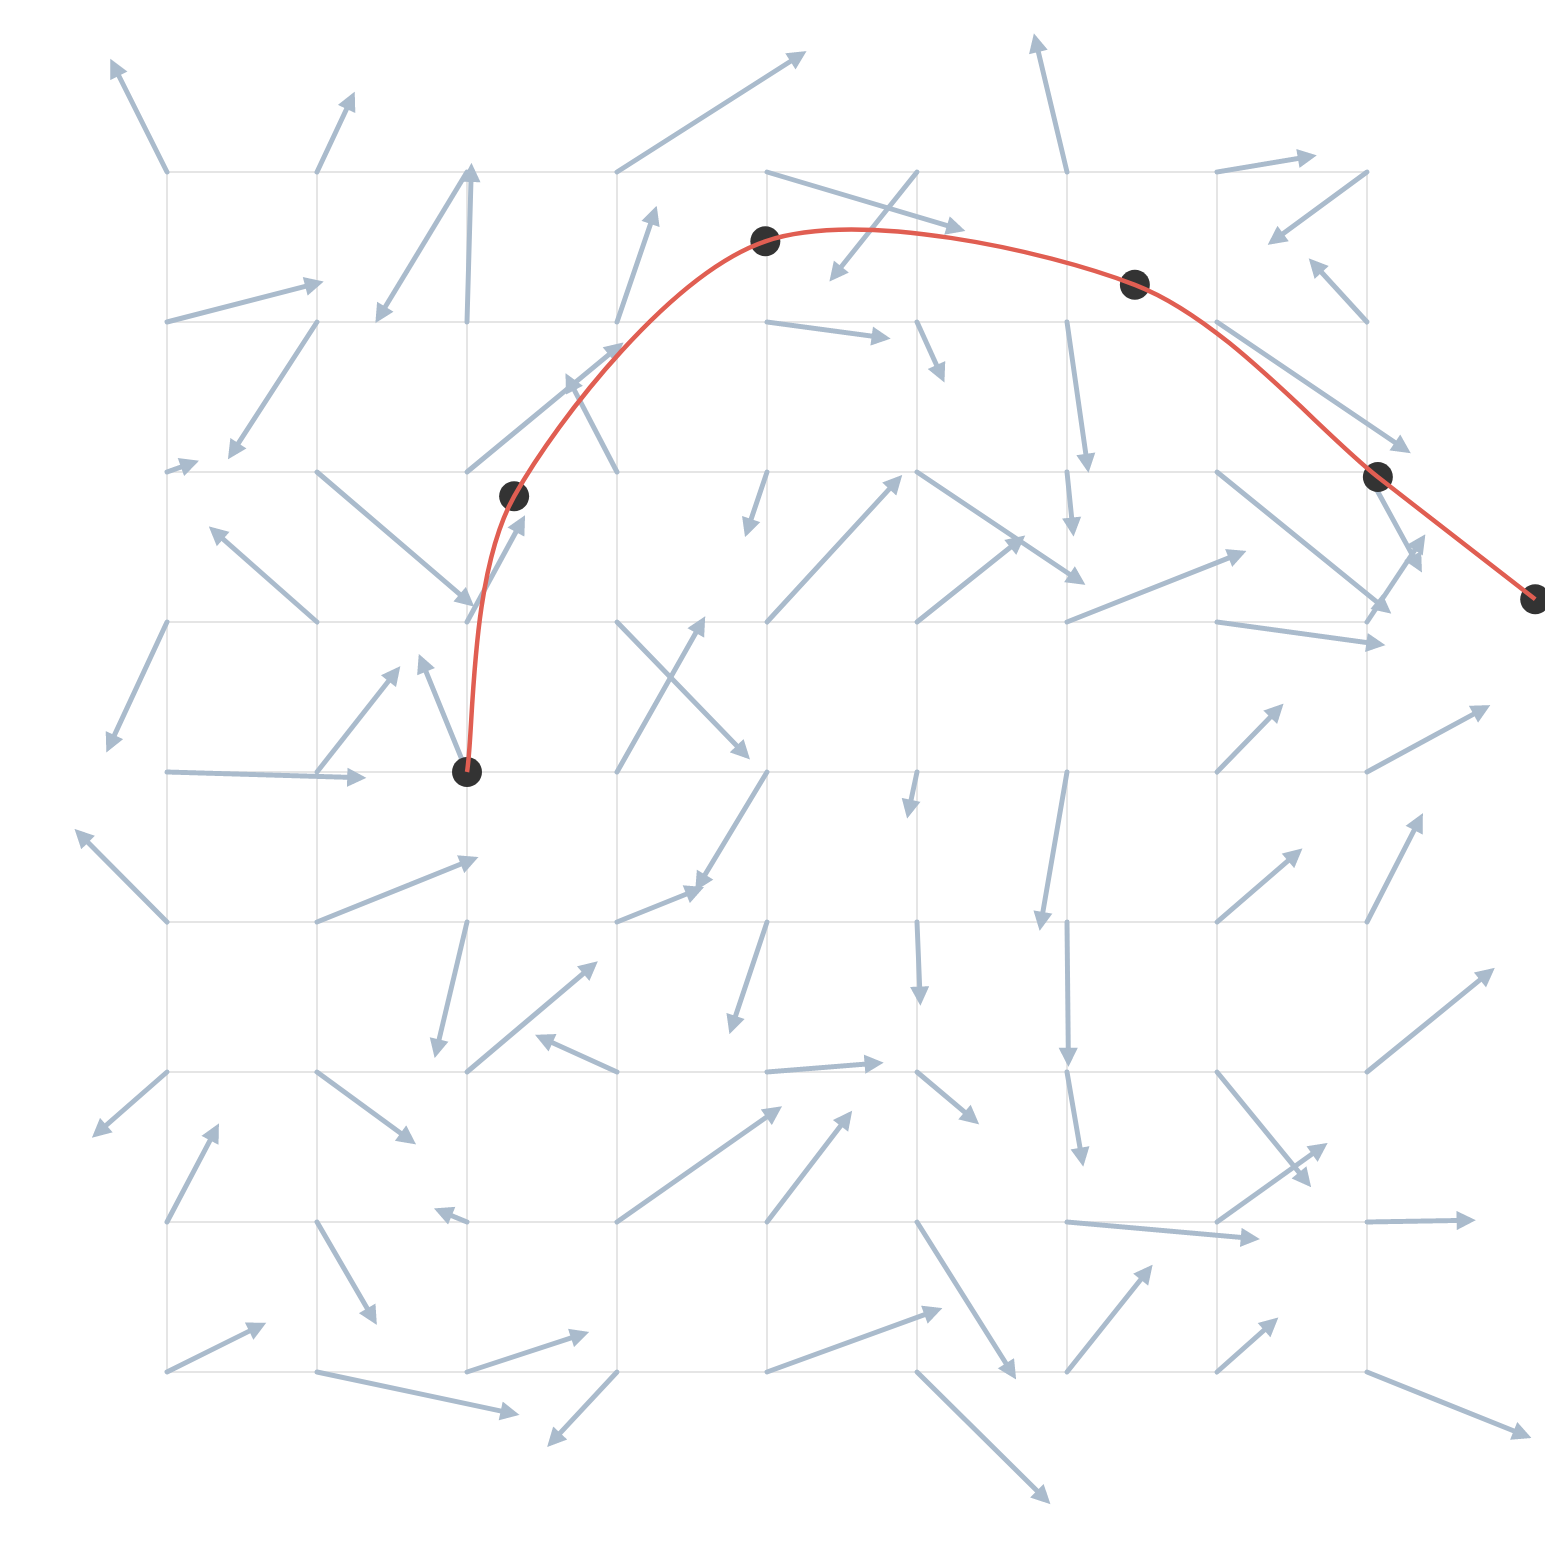 Bezier curve drawn through the points